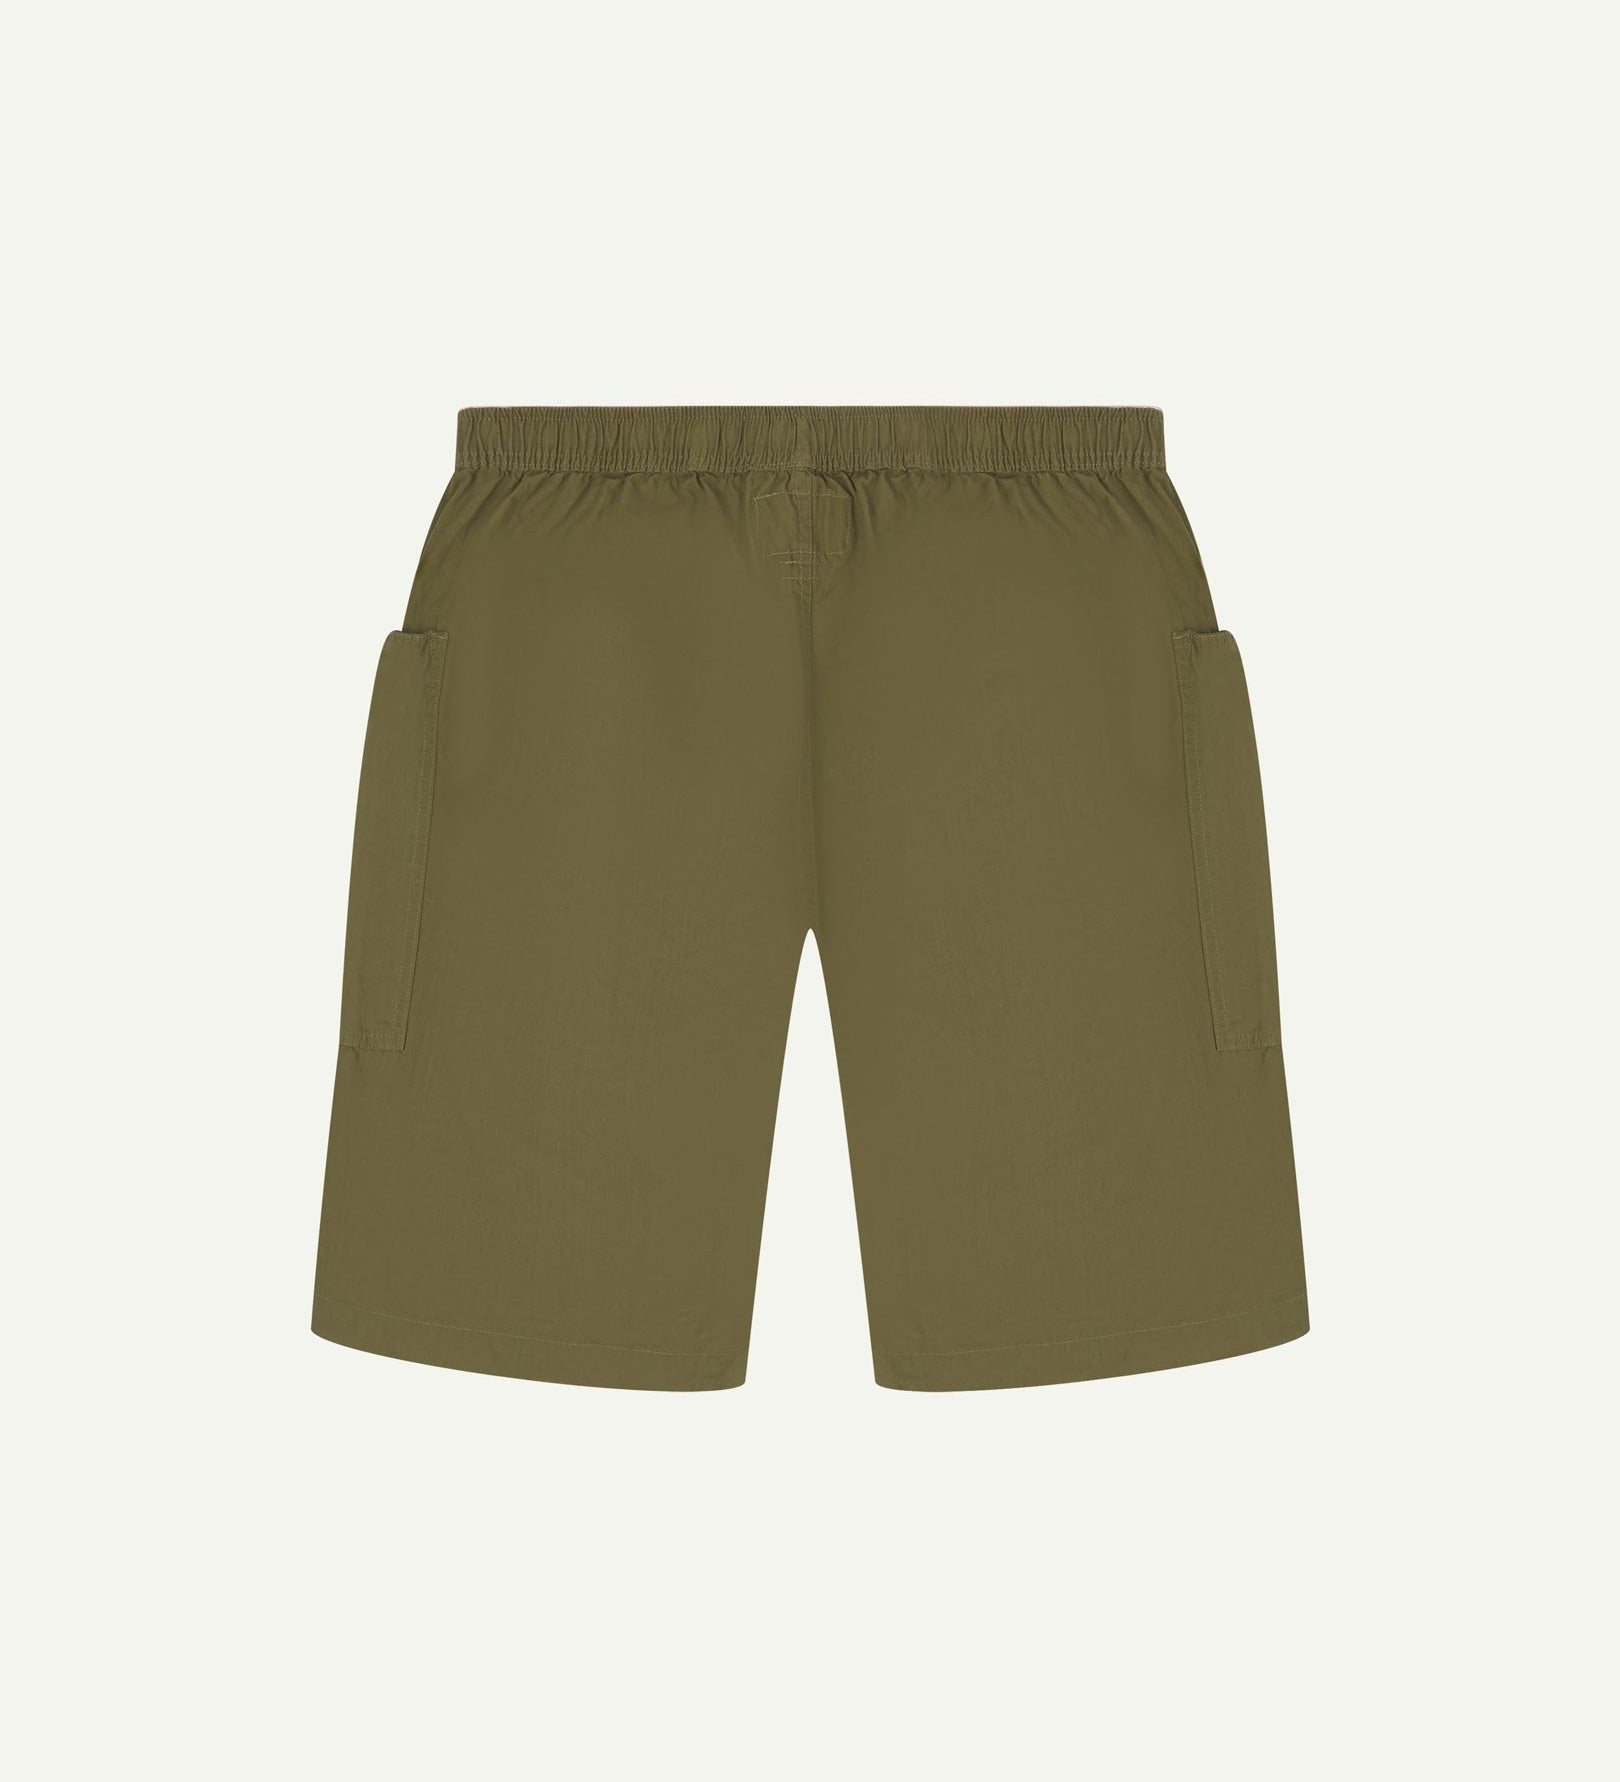 Back flat view of olive-green organic cotton #5015 lightweight cotton shorts by Uskees. Clear view of lightweight elasticated waist and pockets.